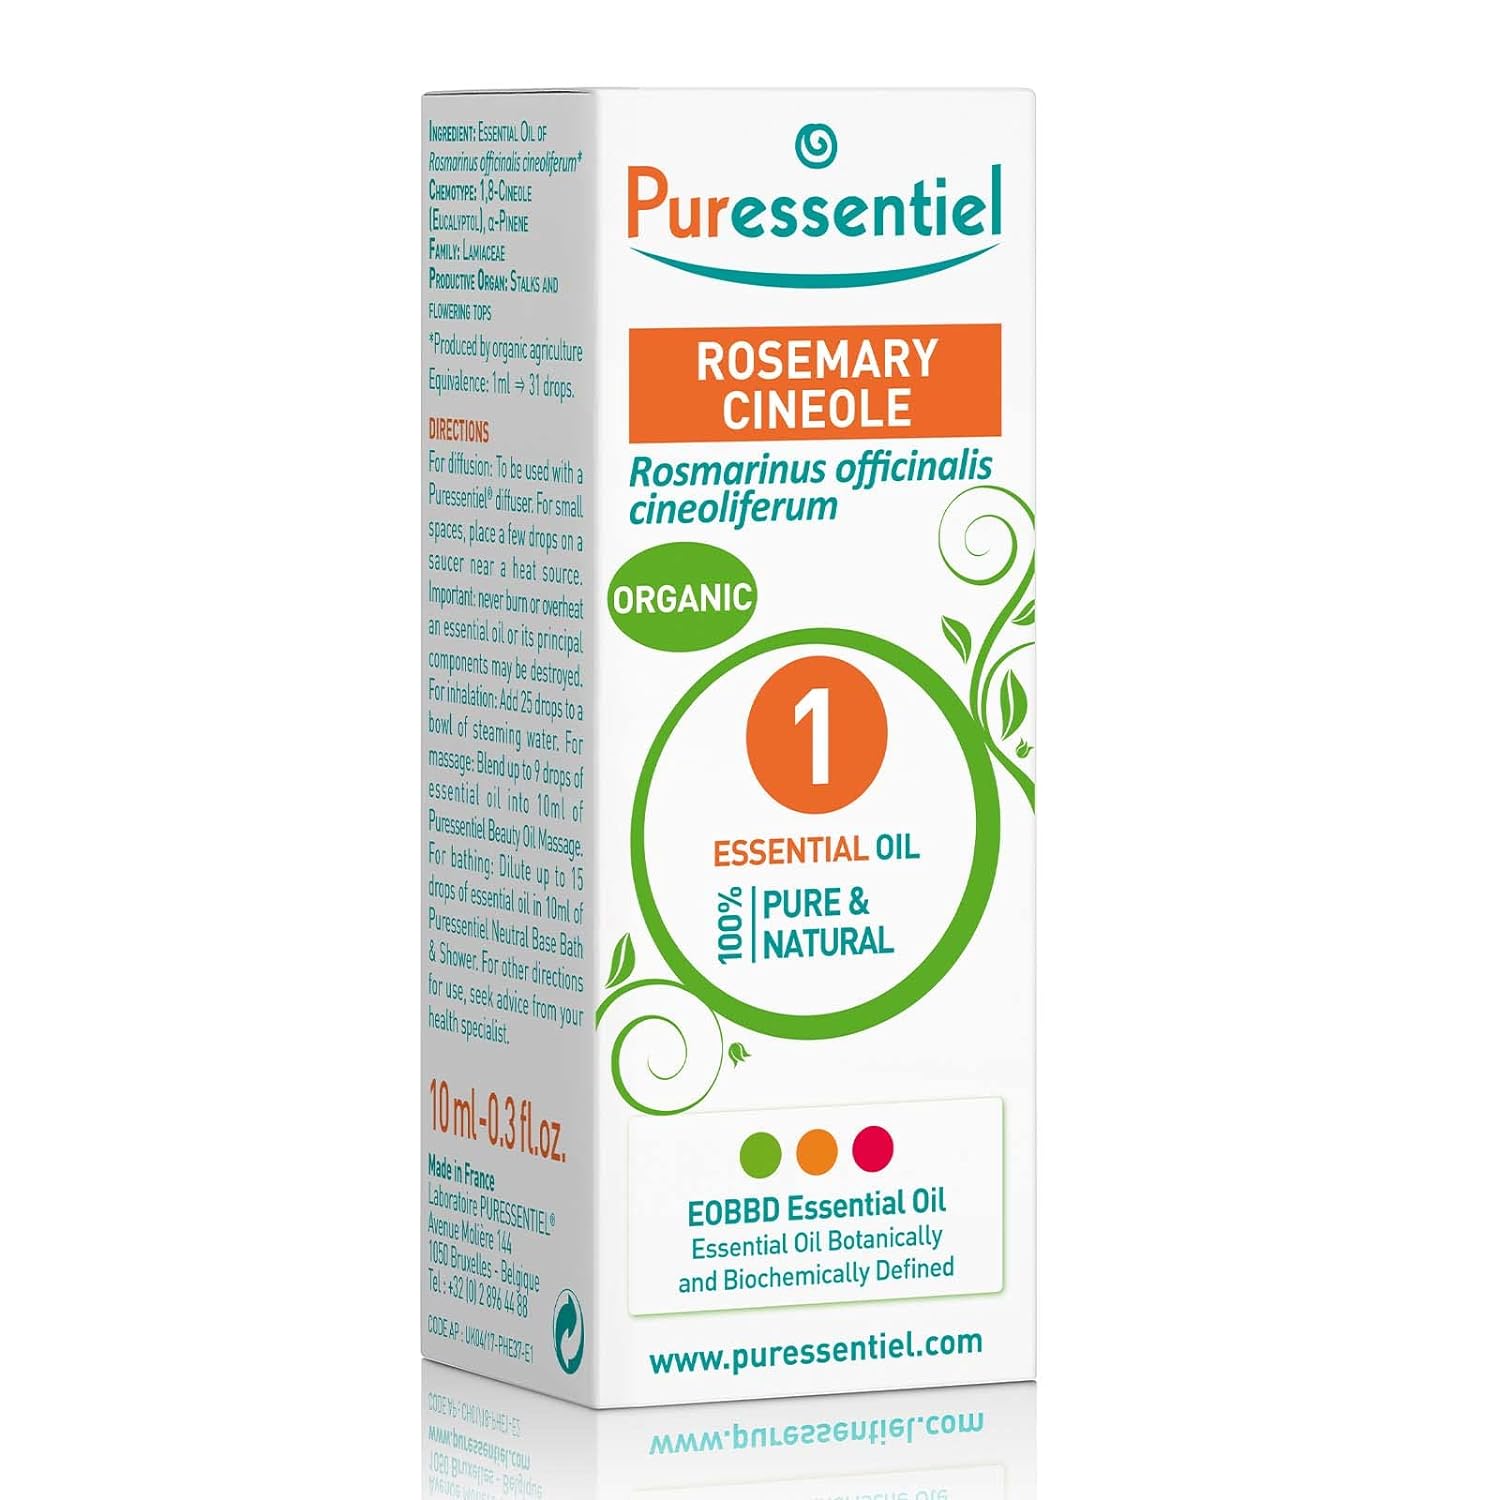 Organic Essential Oil - Rosemary Cineole by Puressentiel for Unisex - 